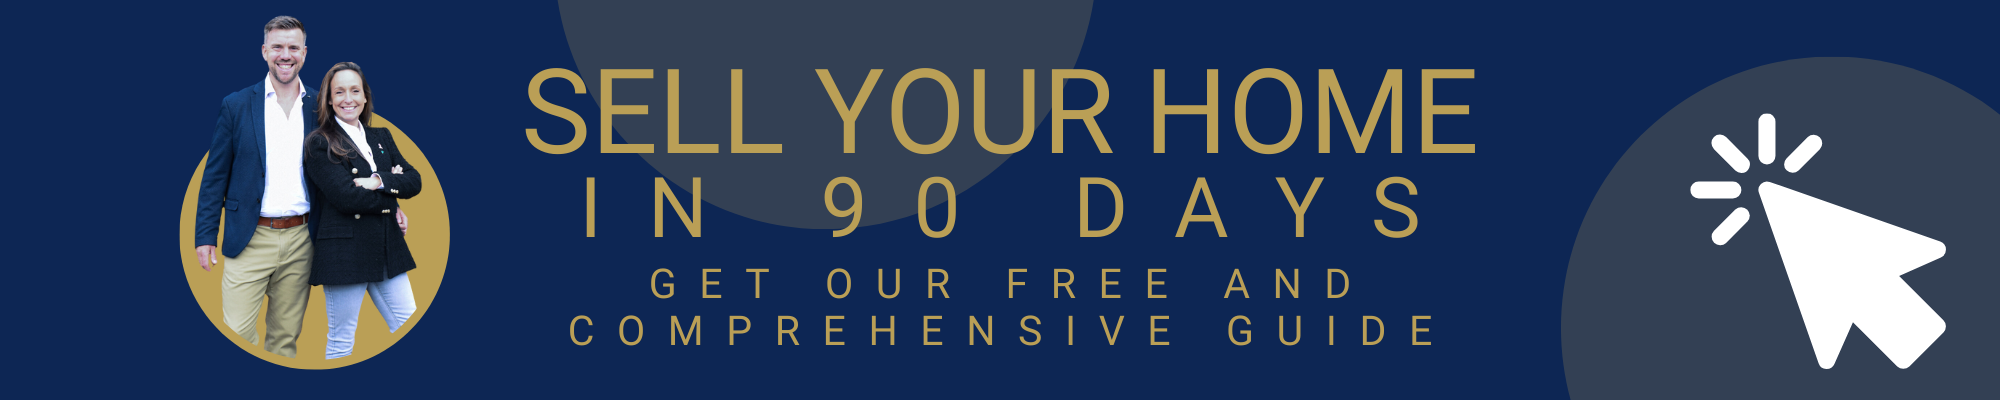 Sell Your Home in 90 Days